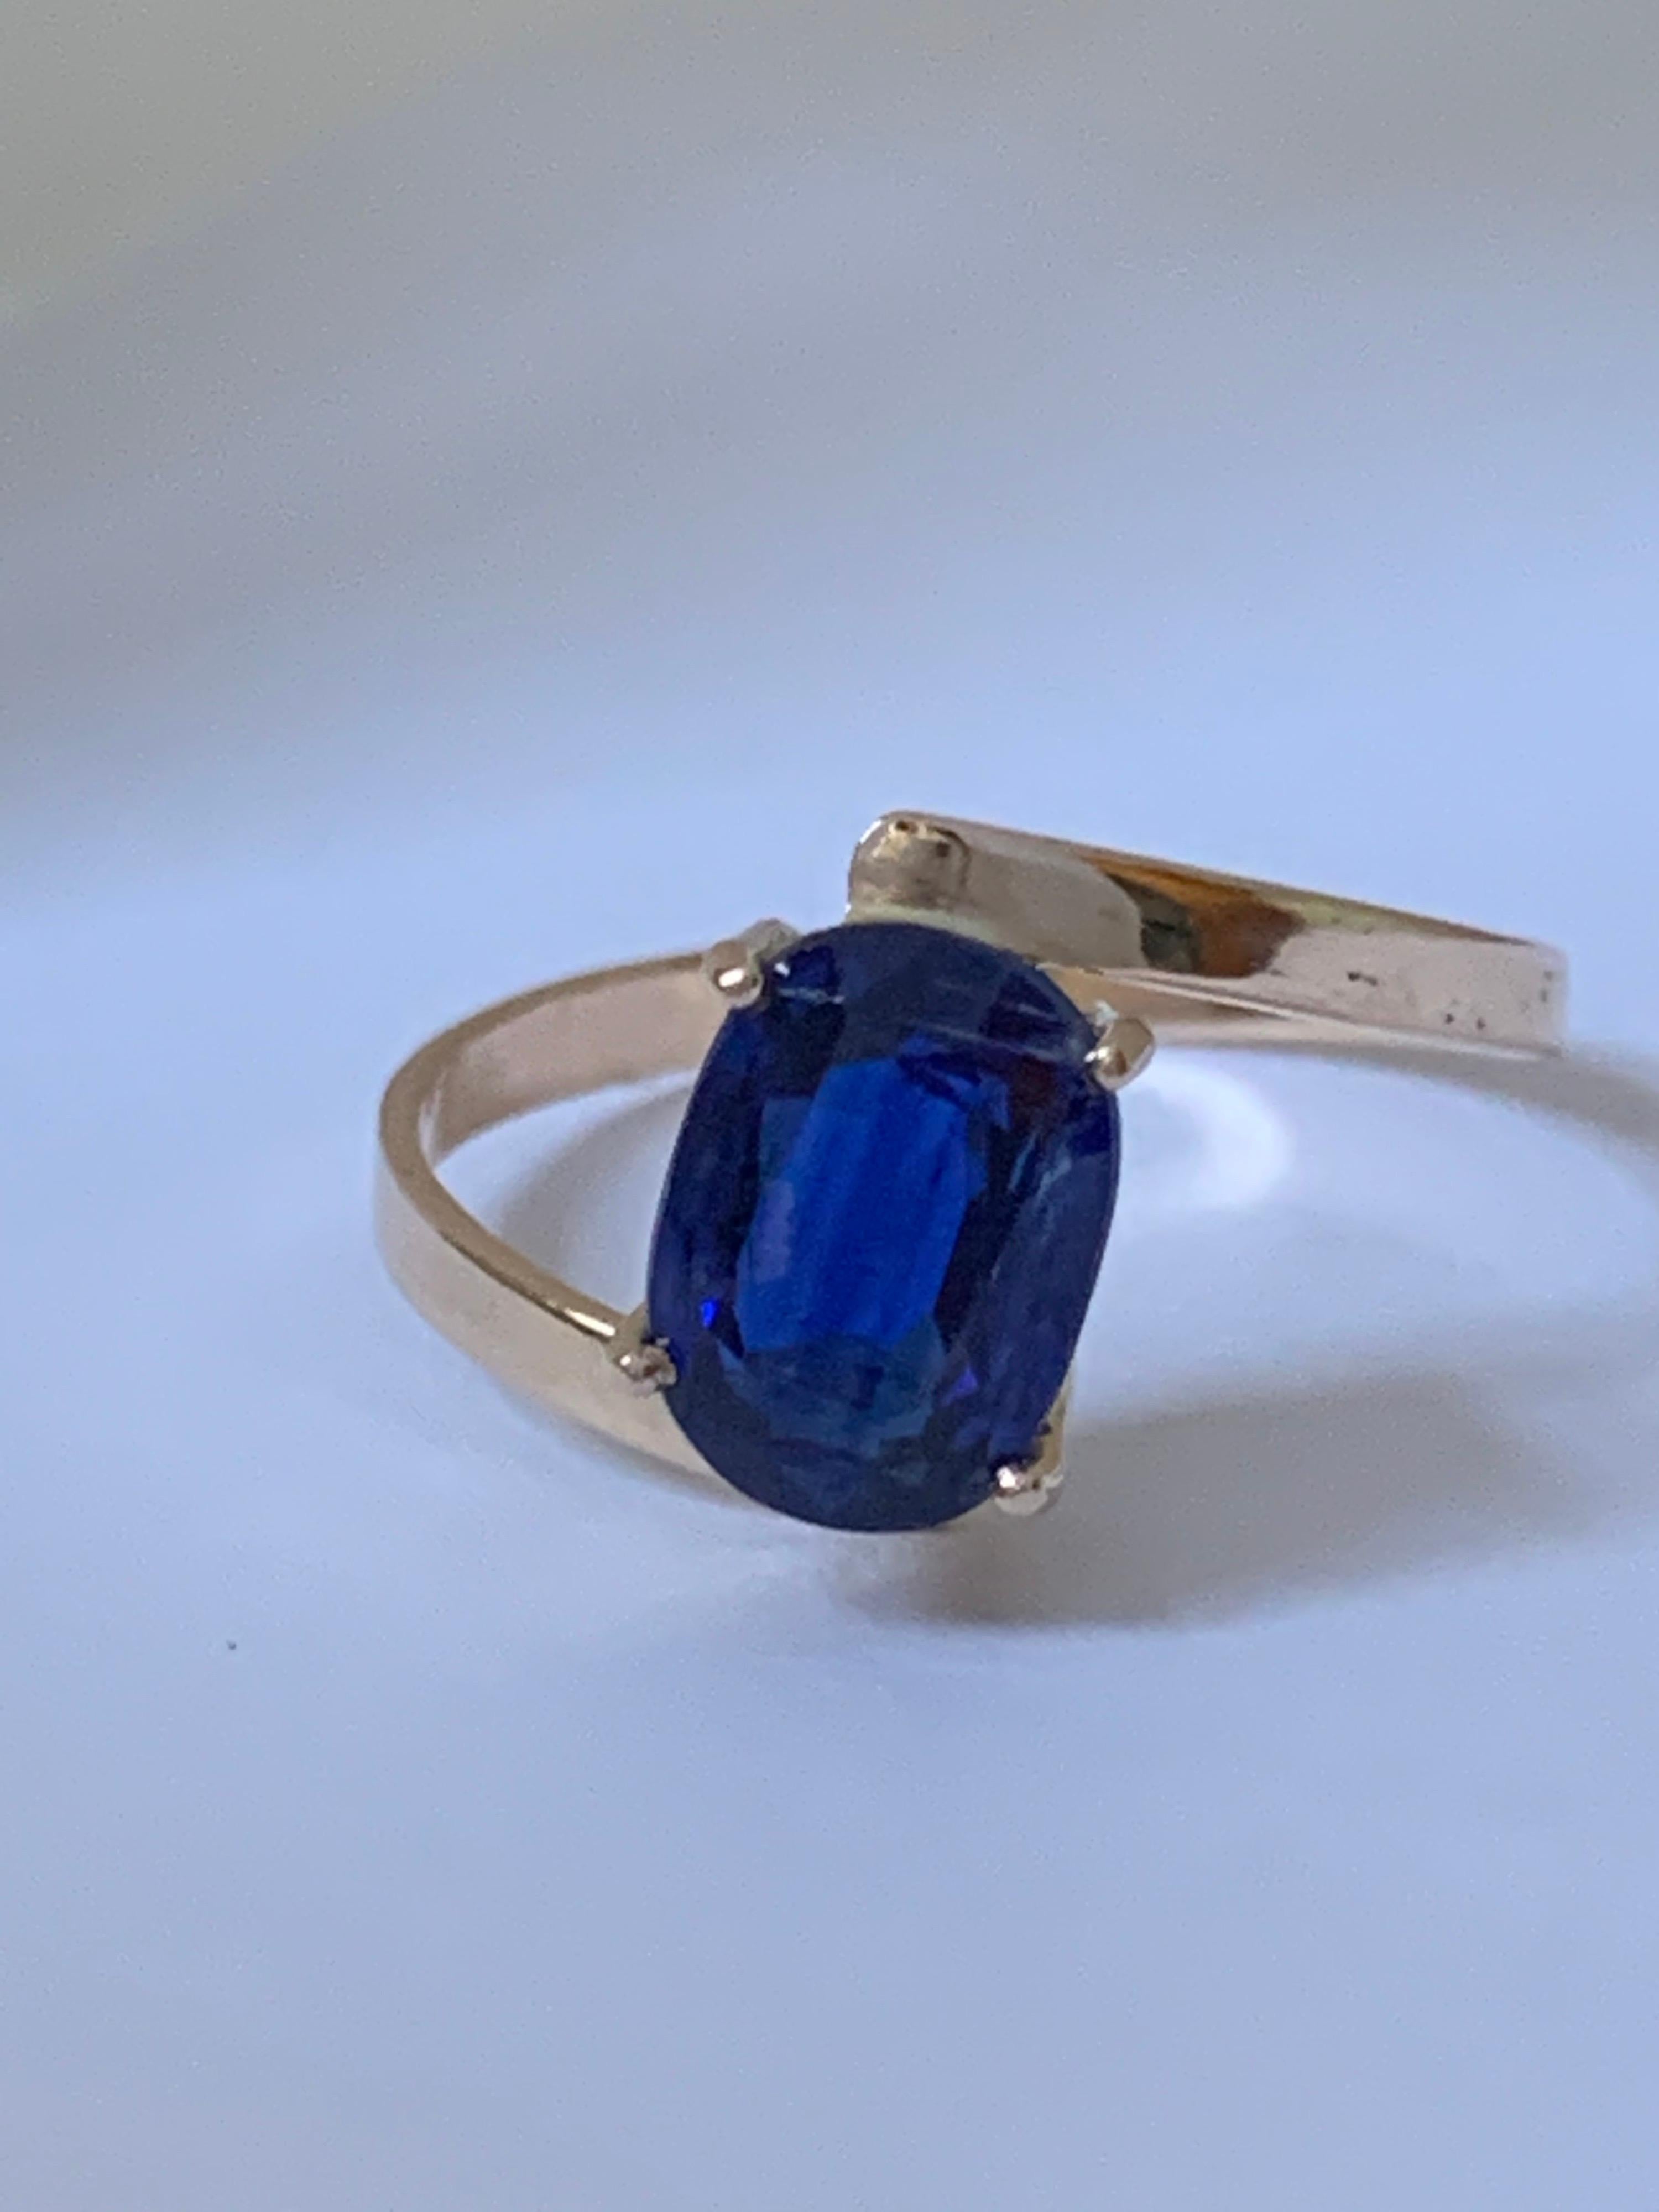 Natural Kyanite is from Nepal. The stone is 6 mm X 8 mm. The Royal blue Kyanite is untreated or unheated stone from mother earth. Its rare to find this quality and size and color. The stone is hand cut and polished. The Ring it self is 100%